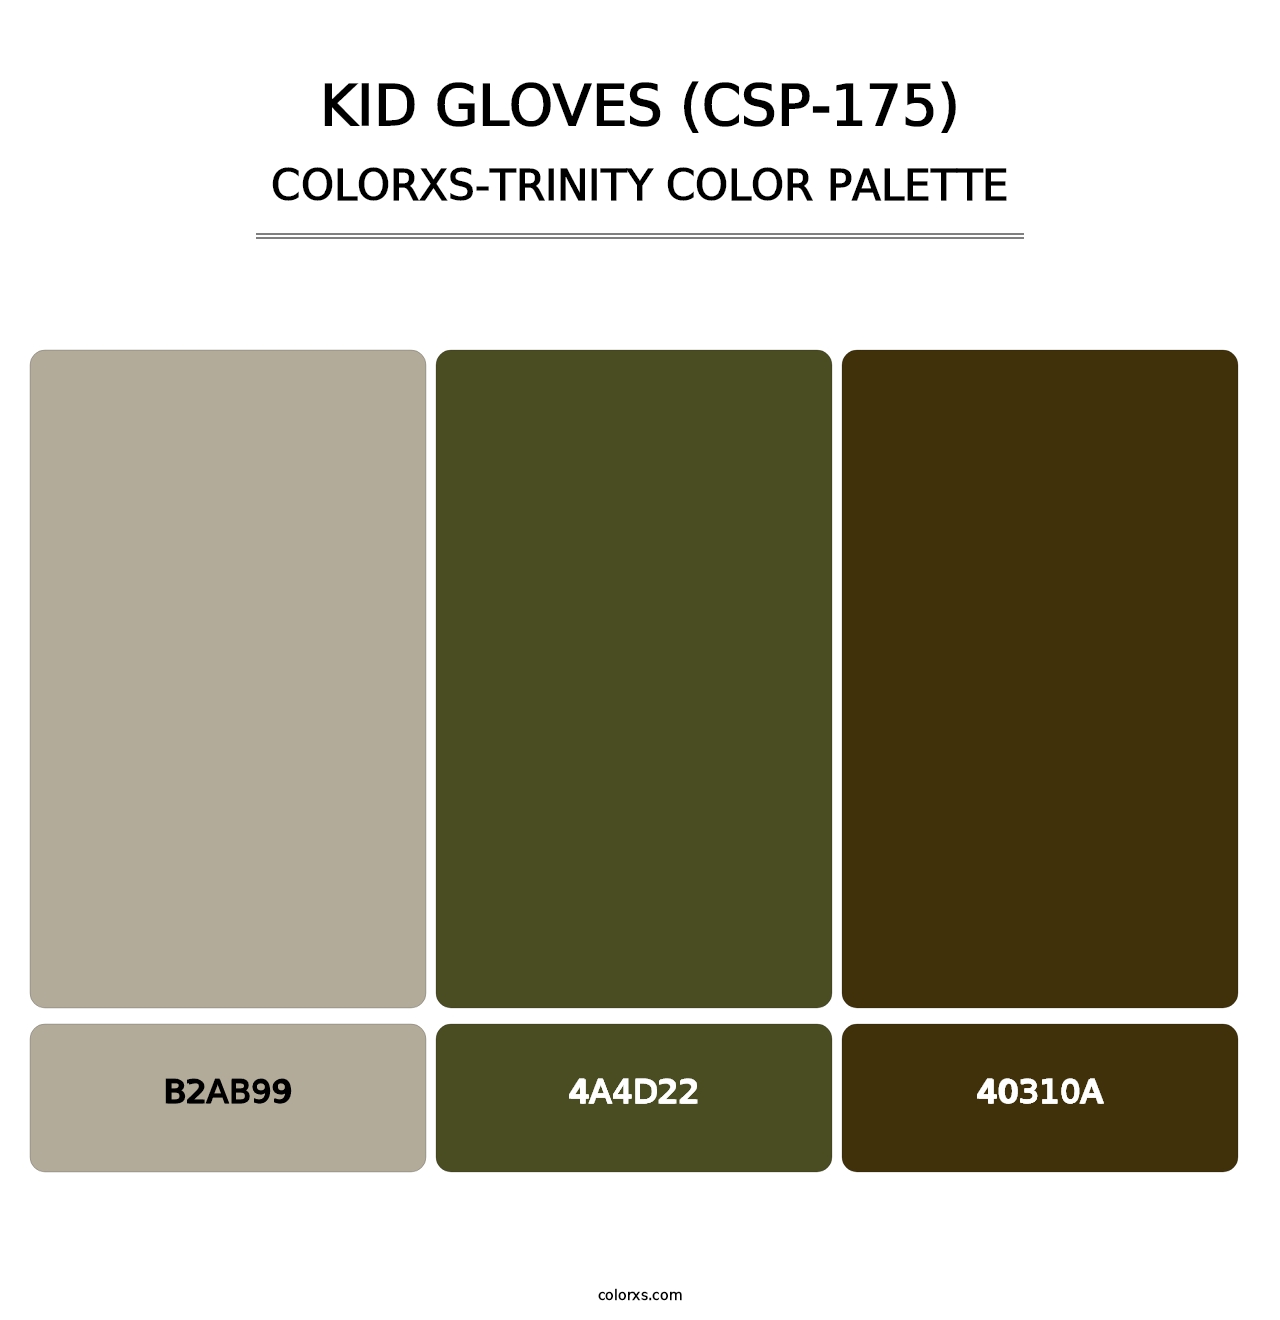 Kid Gloves (CSP-175) - Colorxs Trinity Palette